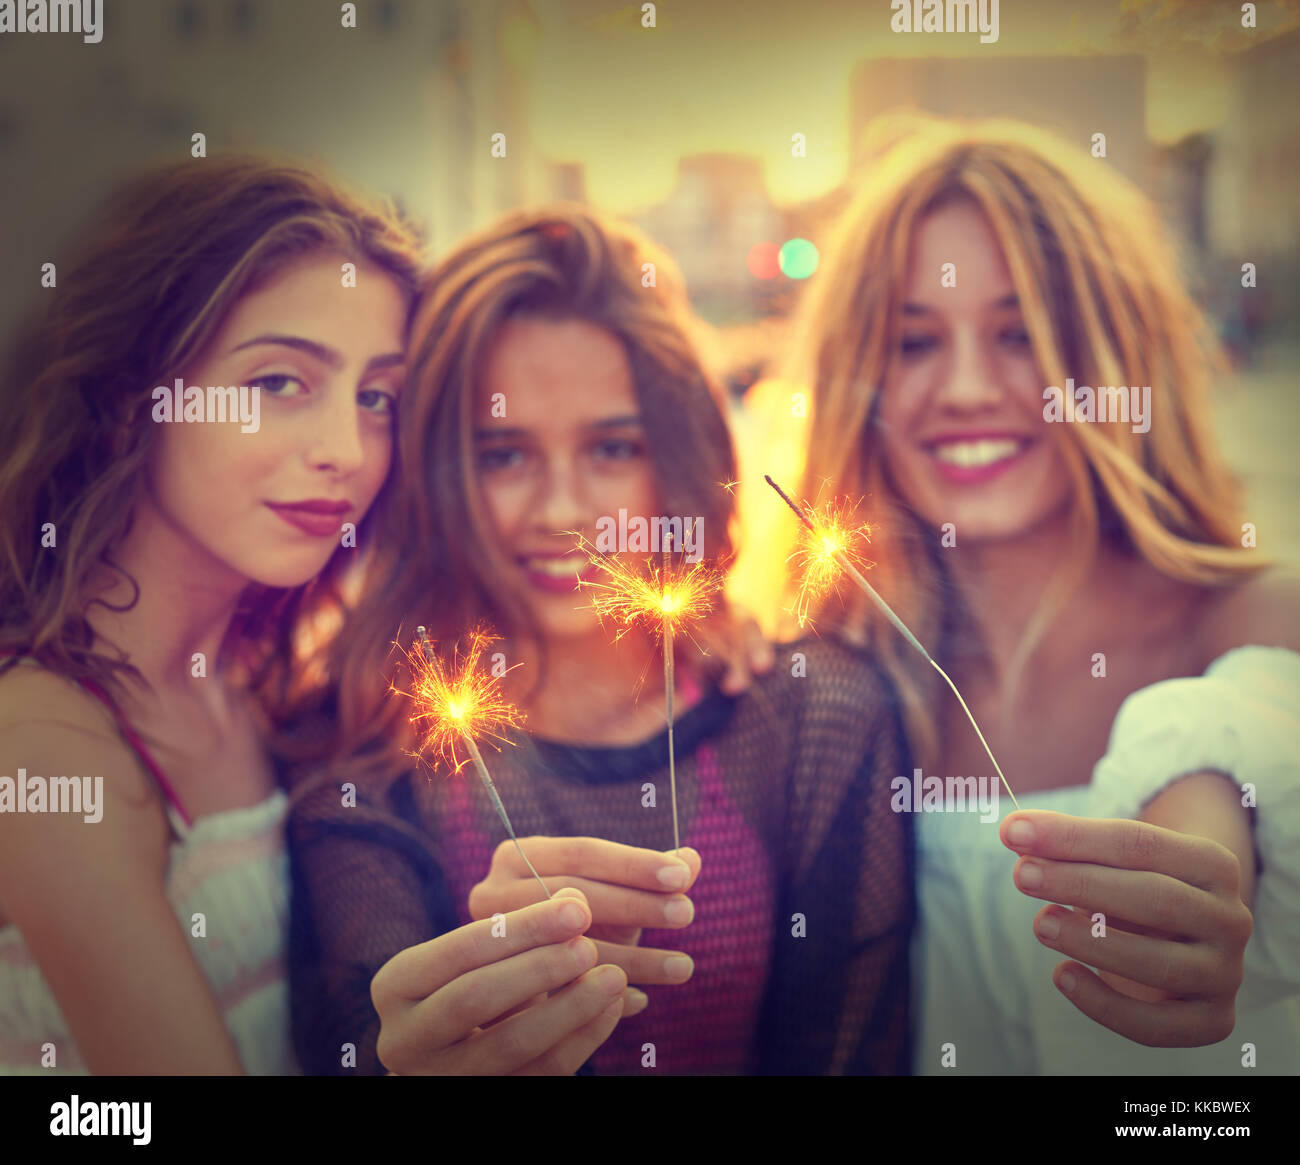 Best friends teen girls with sparklers at sunset in the city filtered image Stock Photo